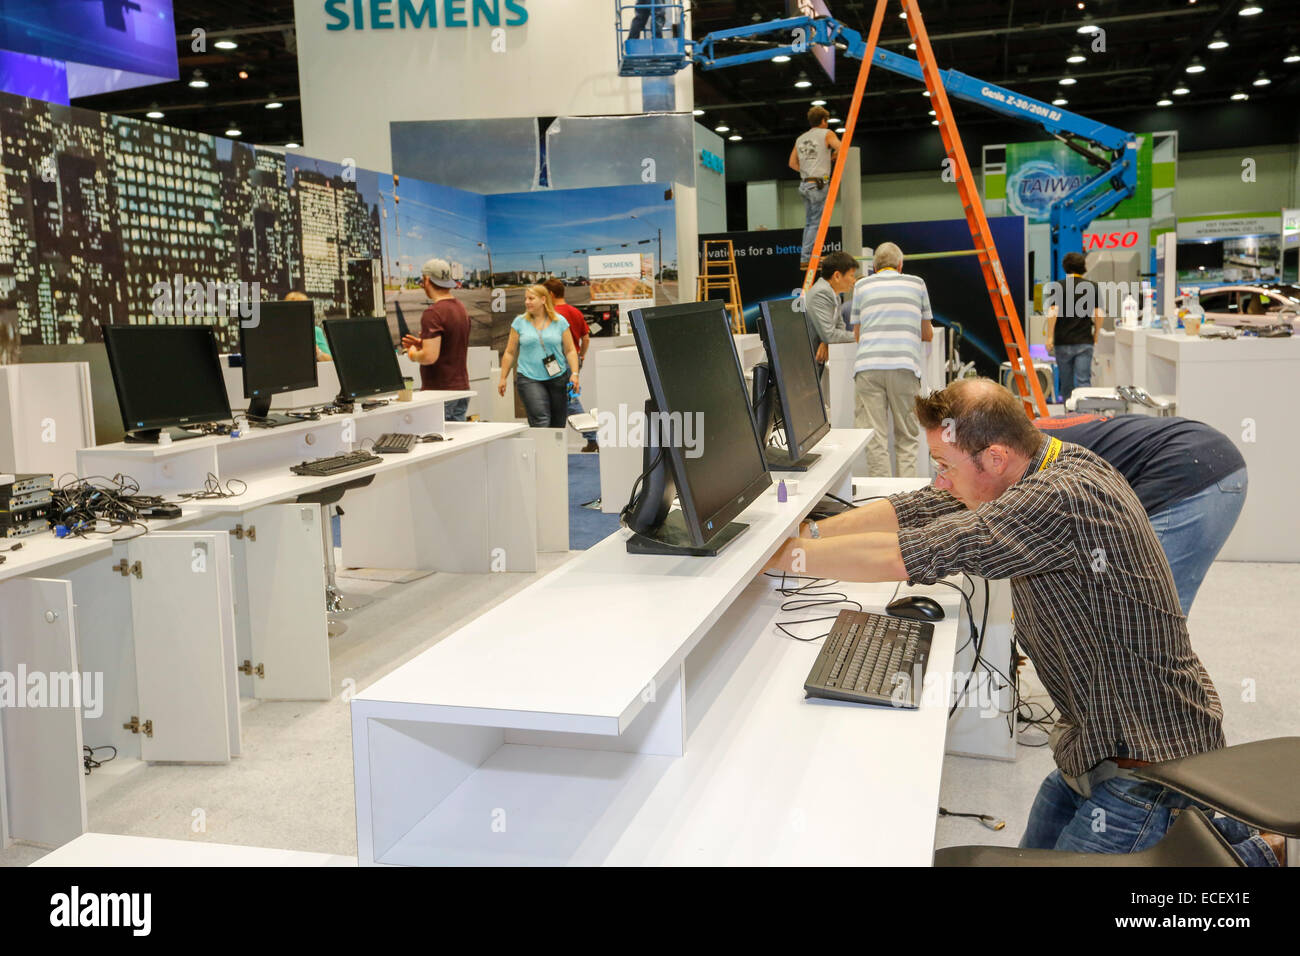 Detroit, Michigan - Workers prepare displays in the exhibit hall for the Intelligent Transport Systems World Congress. Stock Photo